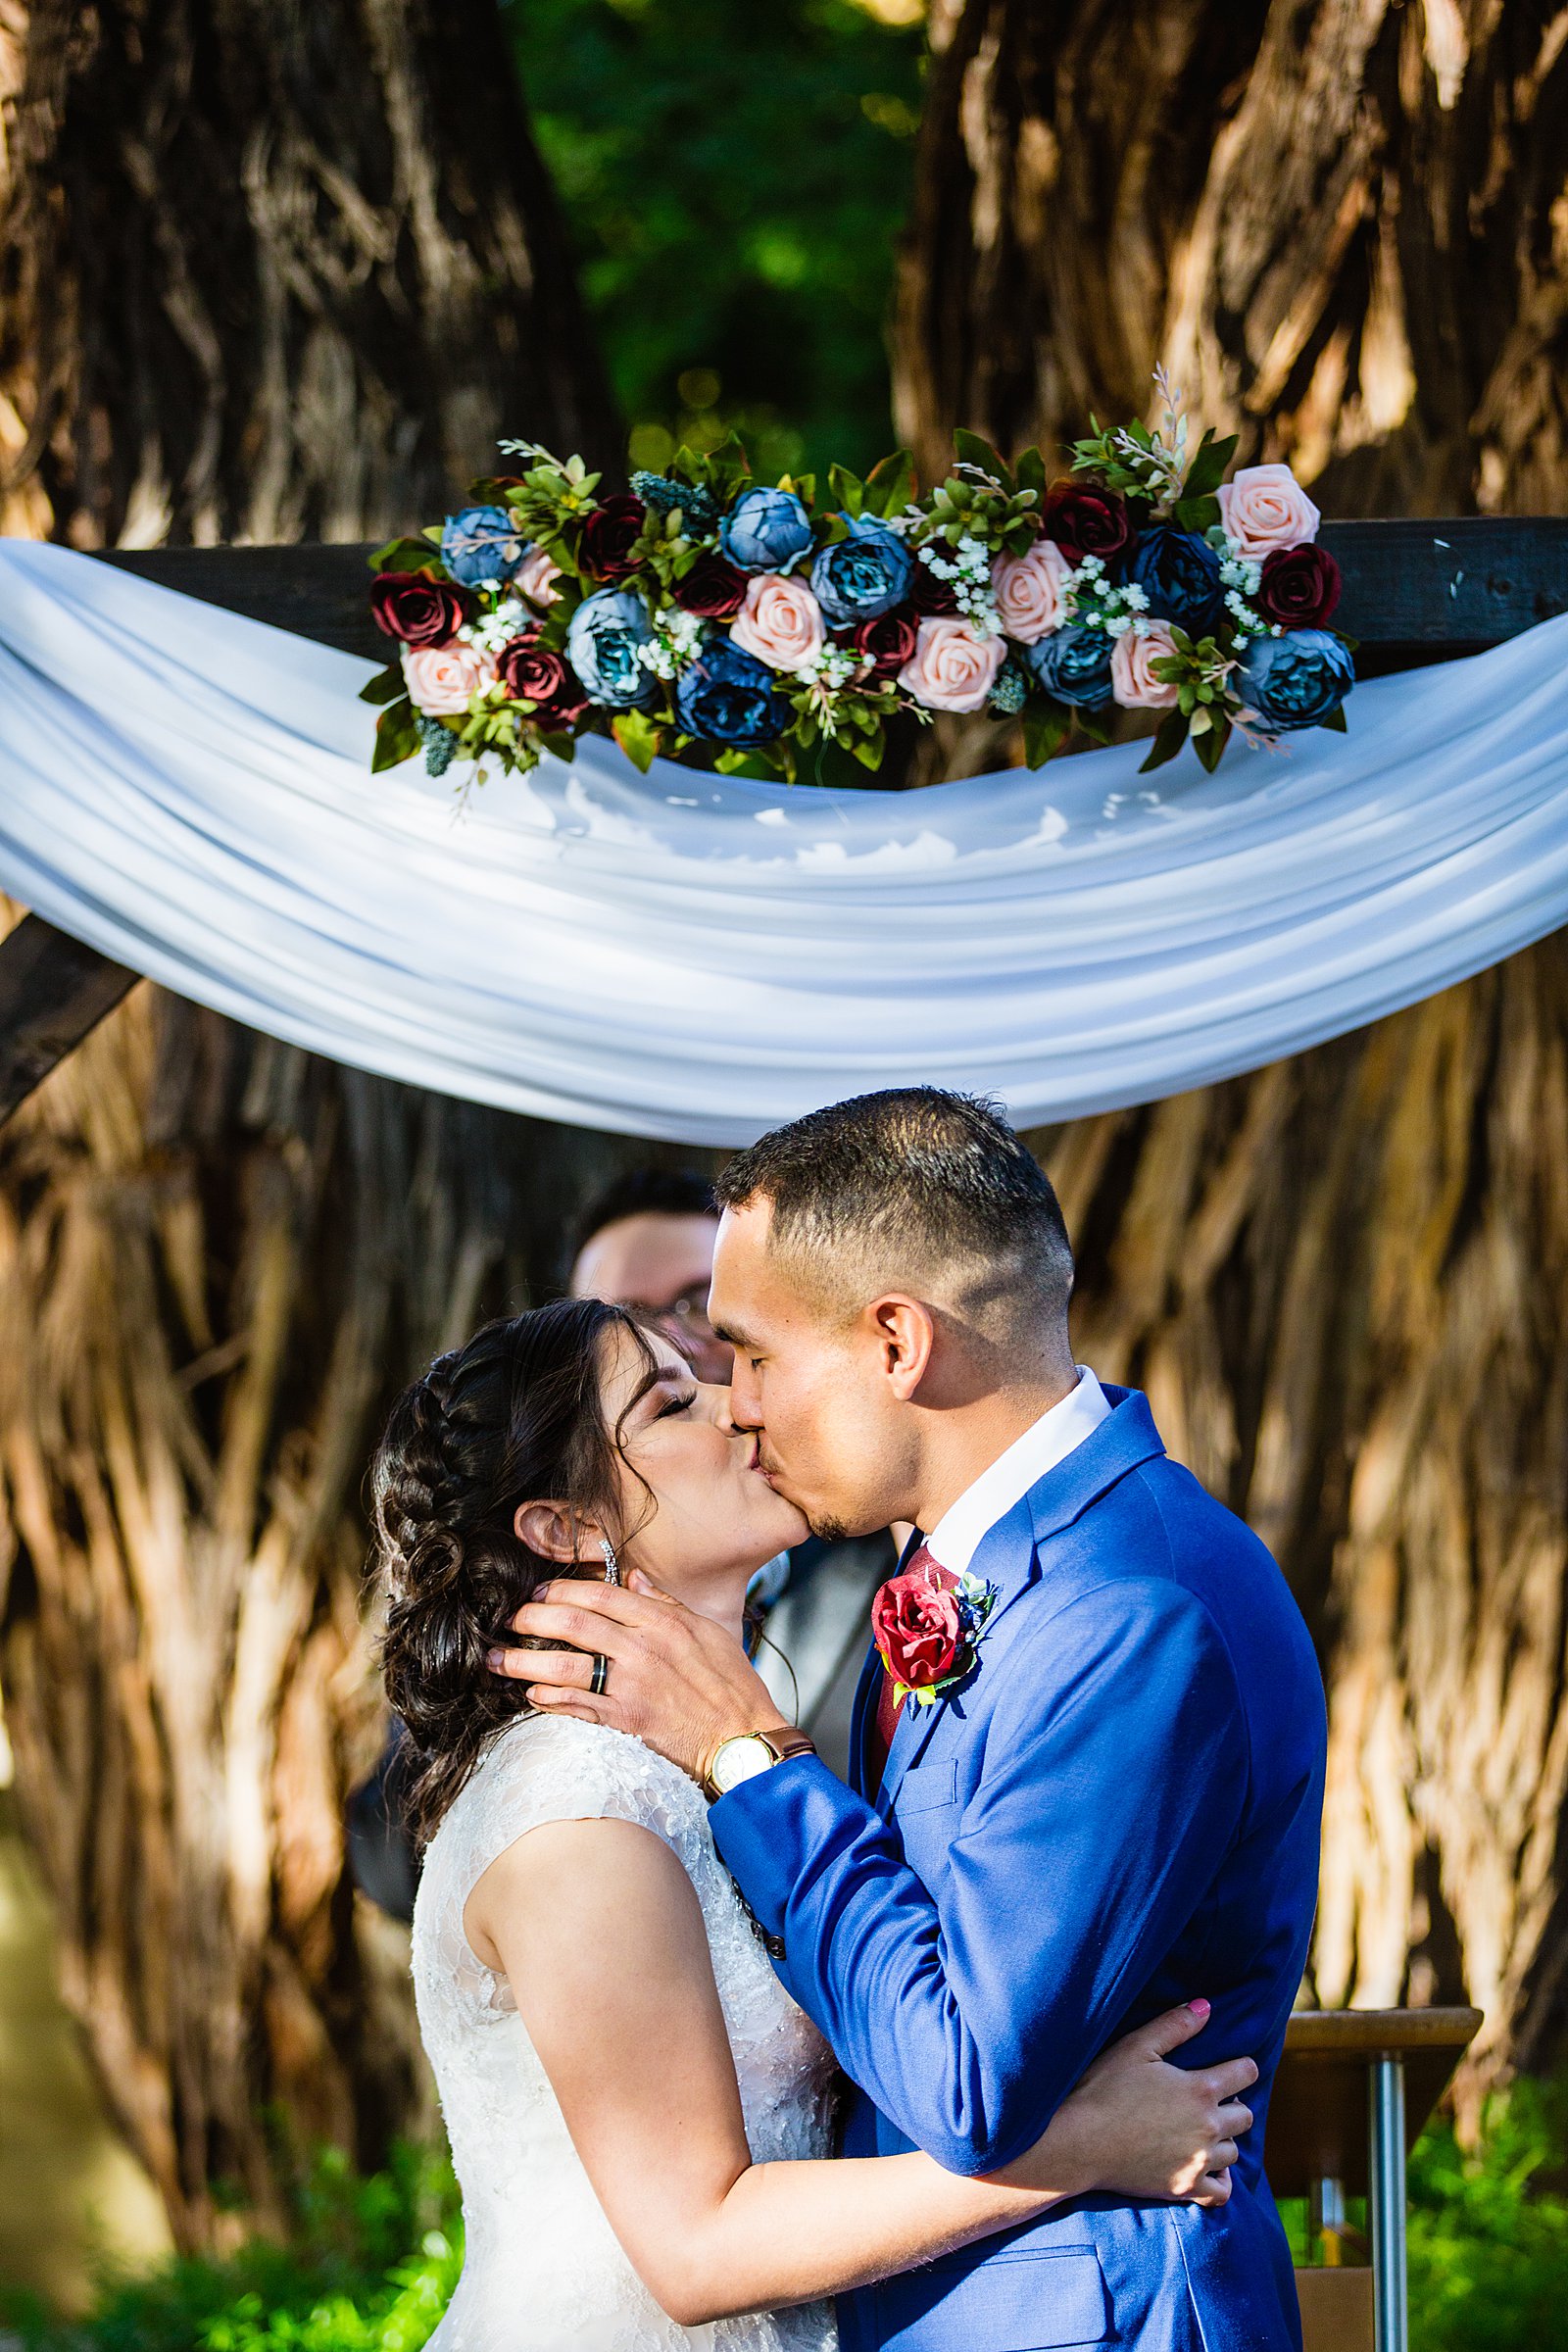 Bride and Groom share their first kiss during their wedding ceremony at Valley Garden Center by Arizona wedding photographer PMA Photography.